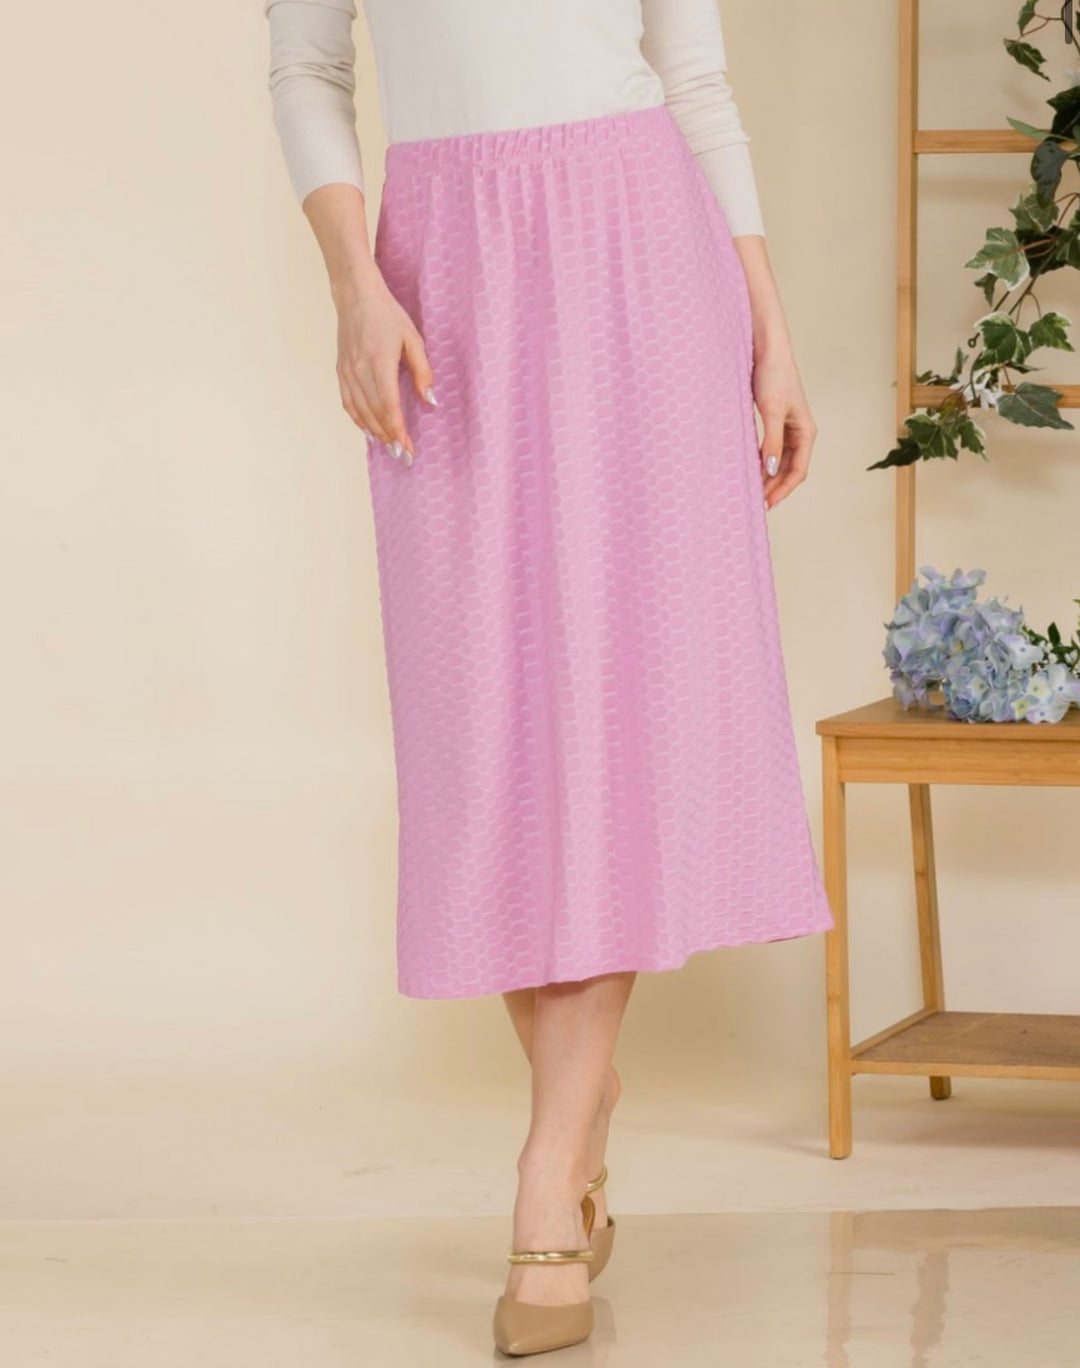 modest clothing stores online